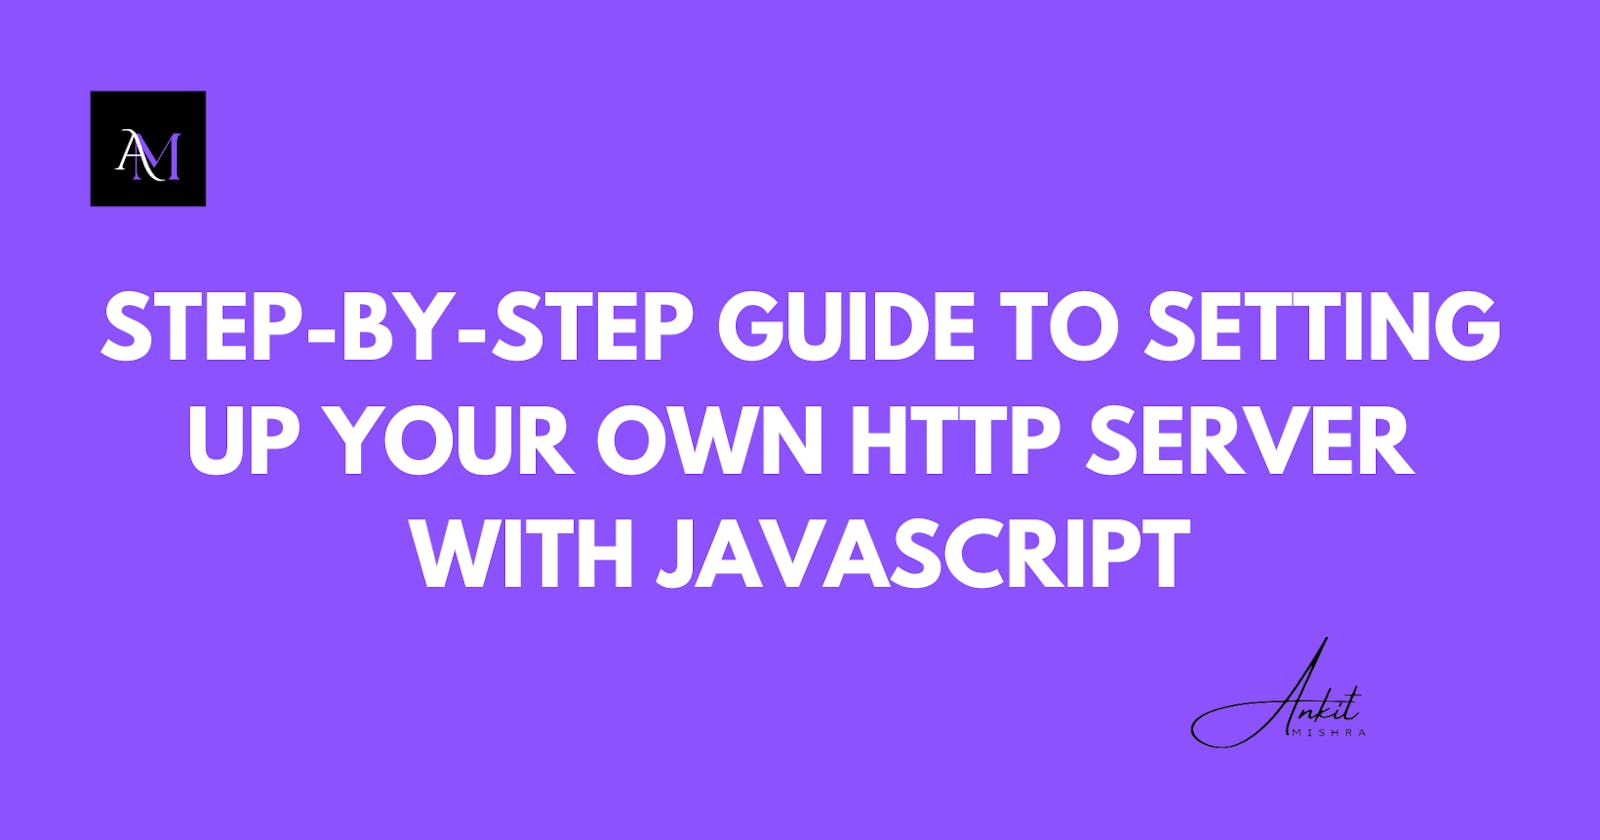 Step-by-Step Guide to Setting Up Your Own HTTP Server with JavaScript